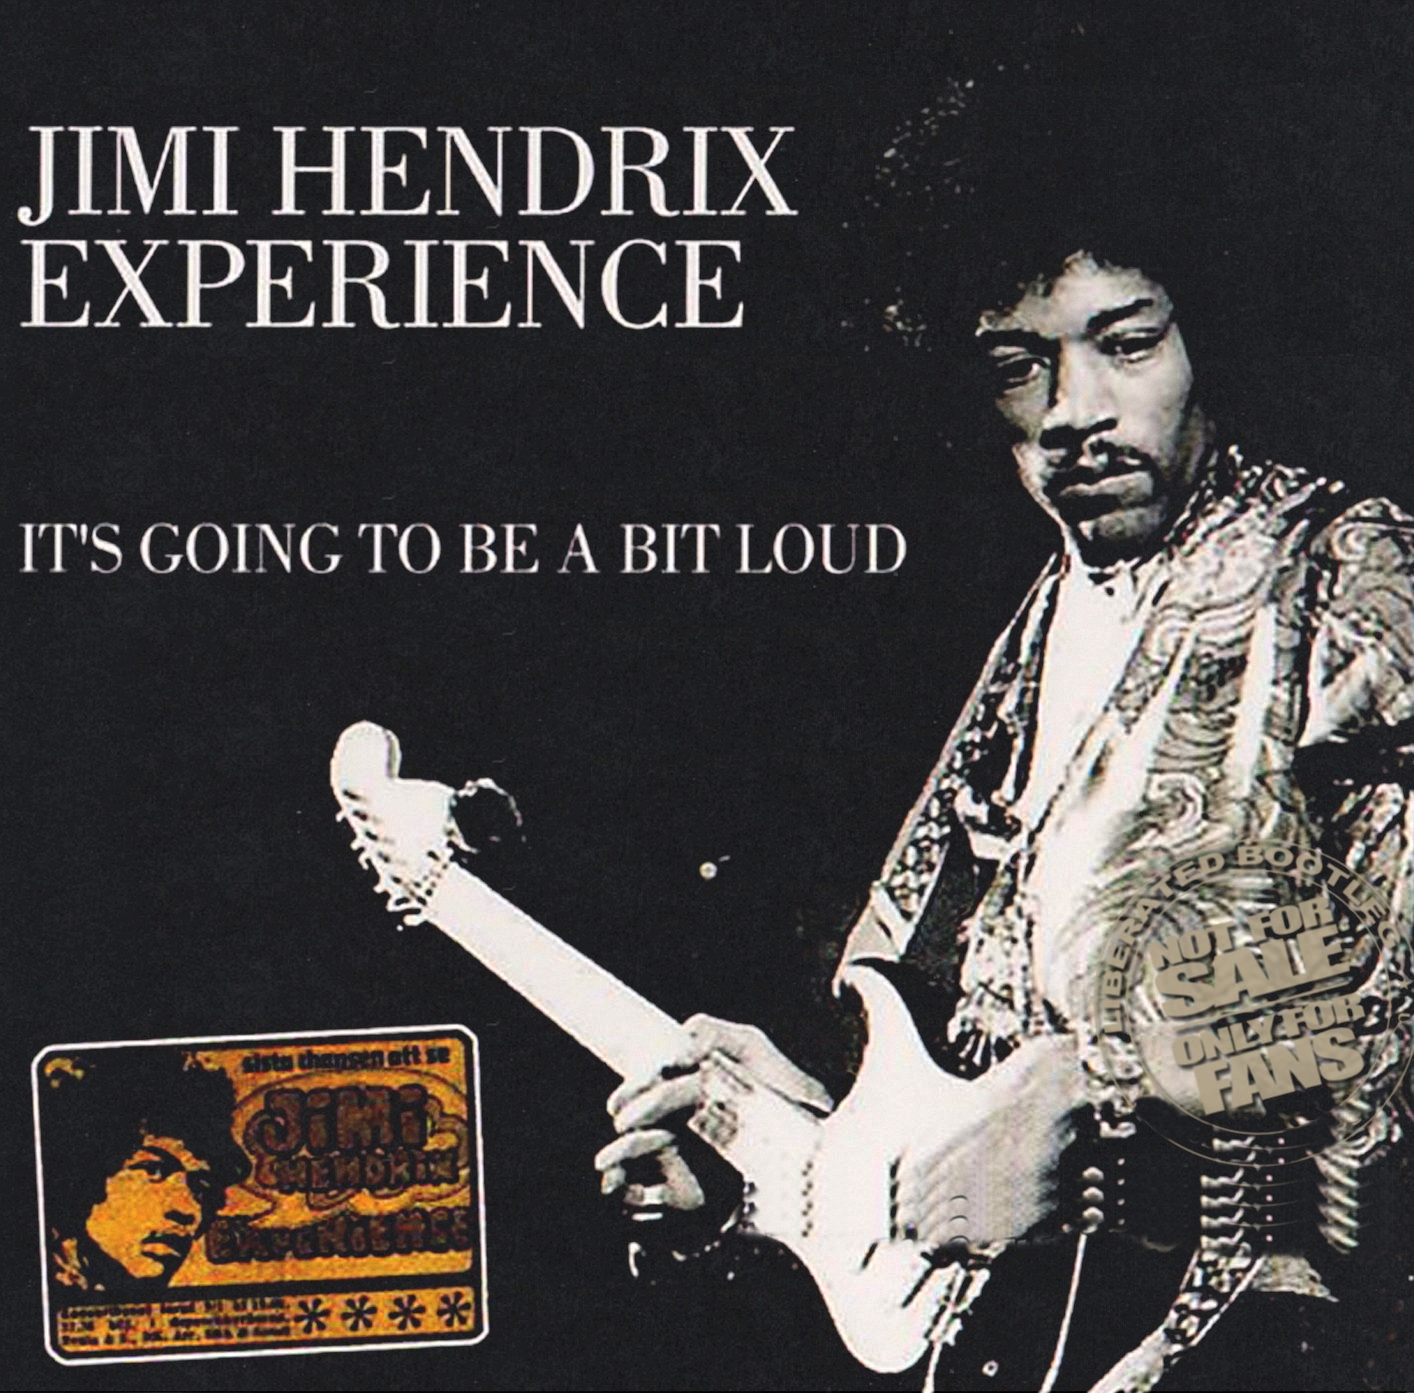 1969 - Jimi Hendrix - Its Going to be a Bit Loud - Stockholm, Sweden 2nd show (Godfather)